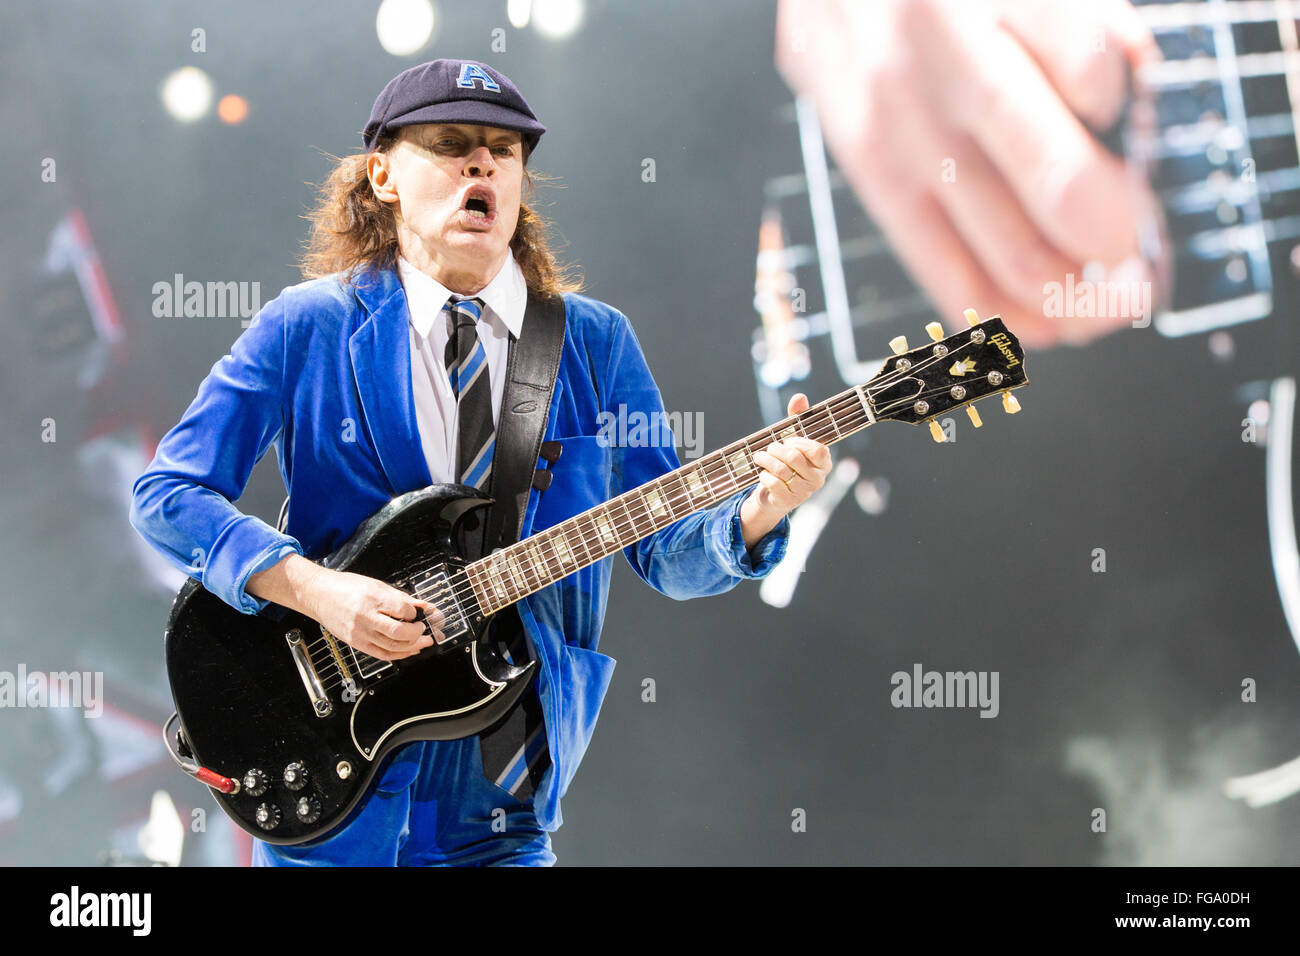 Chicago, Illinois, USA. 17th Feb, 2016. Guitarist ANGUS YOUNG of AC/DC performs live on the Rock or Bust tour at the United Center in Chicago, Illinois © Daniel DeSlover/ZUMA Wire/Alamy Live News Stock Photo